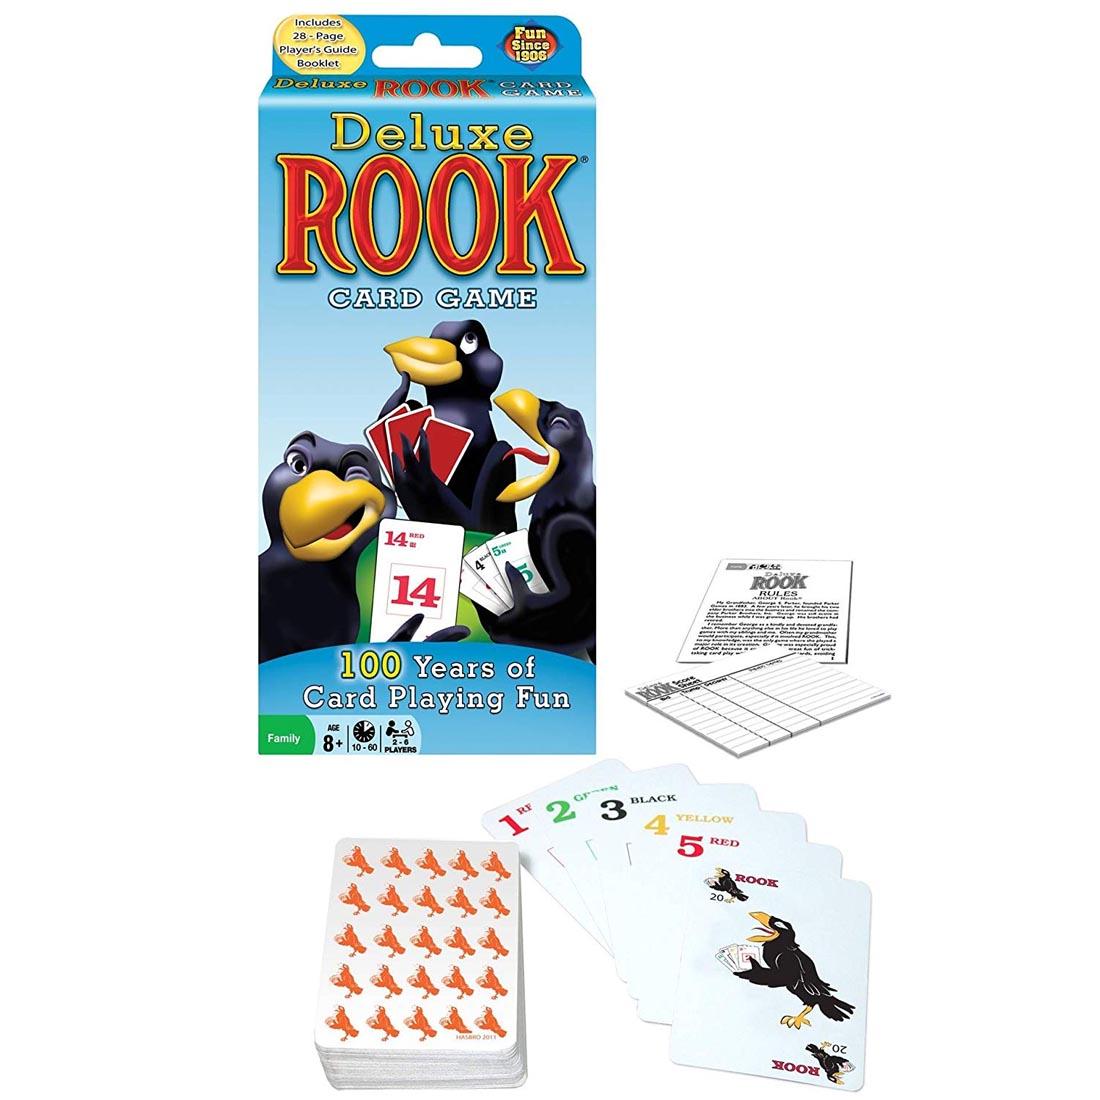 box and cards of Deluxe Rook Card Game